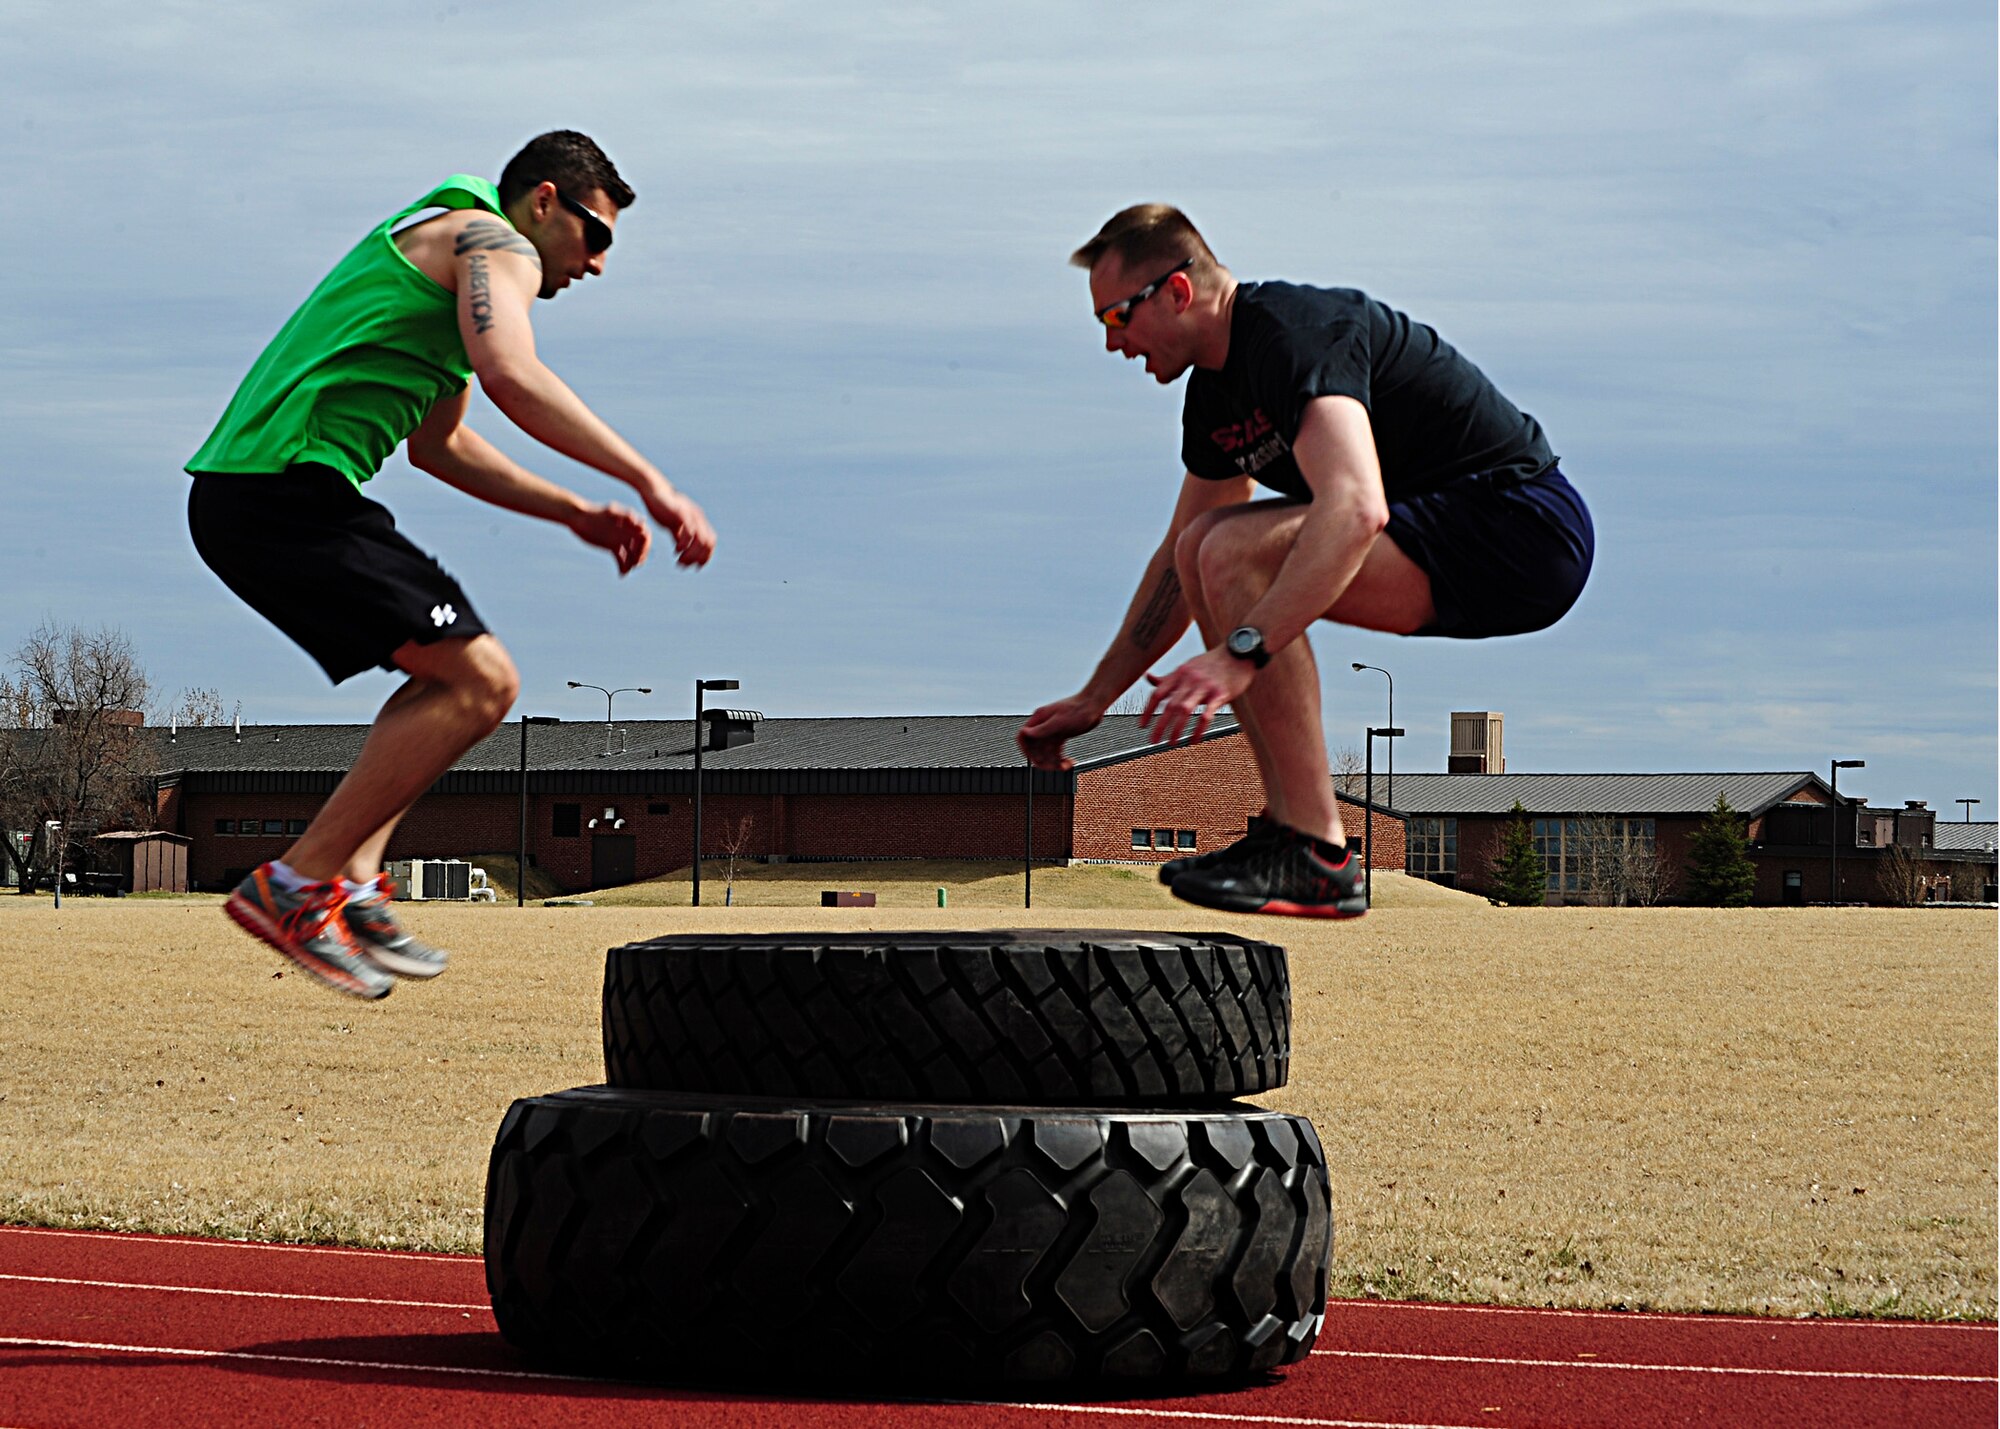 Senior Airman Joshua L. Coonich, 319th Medical Operations Squadron flight medicine medical technician, and Air Force Staff Sgt. Adam Stelmack, 319th Operations Support Squadron NCO in charge of airfield management operations, perform box jumps using tires as a platform April 18, 2015 on Grand Forks Air Force Base, N.D. Coonich and Stelmack are members of a group of Airmen dedicated to training for a Battlefield Airman career field. (U.S. Air Force photo by Airman 1st Class Ryan Sparks/released)